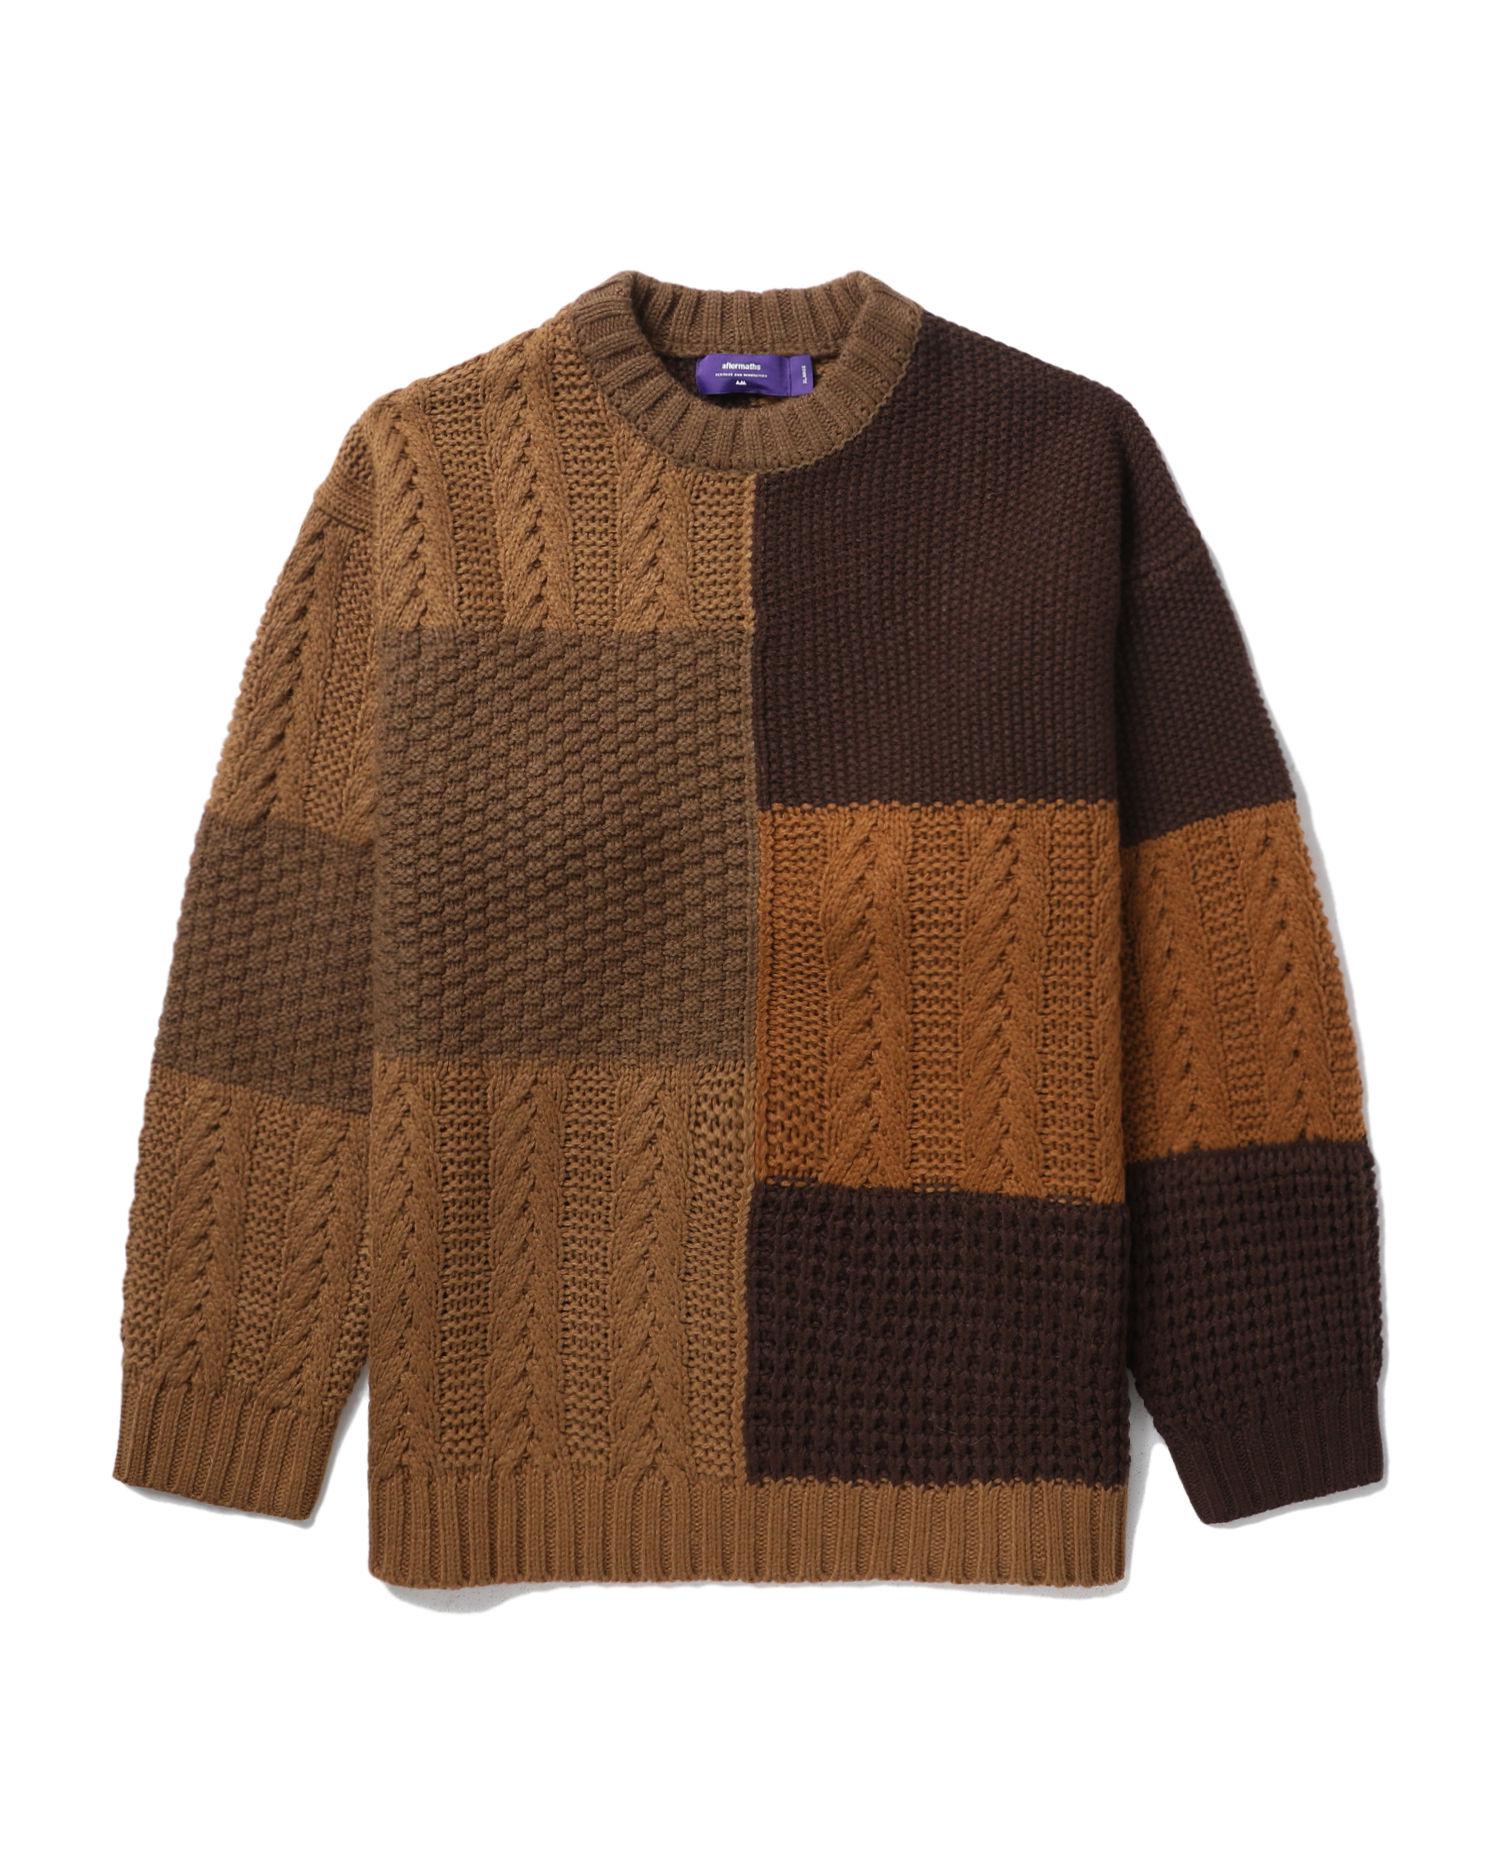 Patchwork knit crew neck by AFTERMATHS